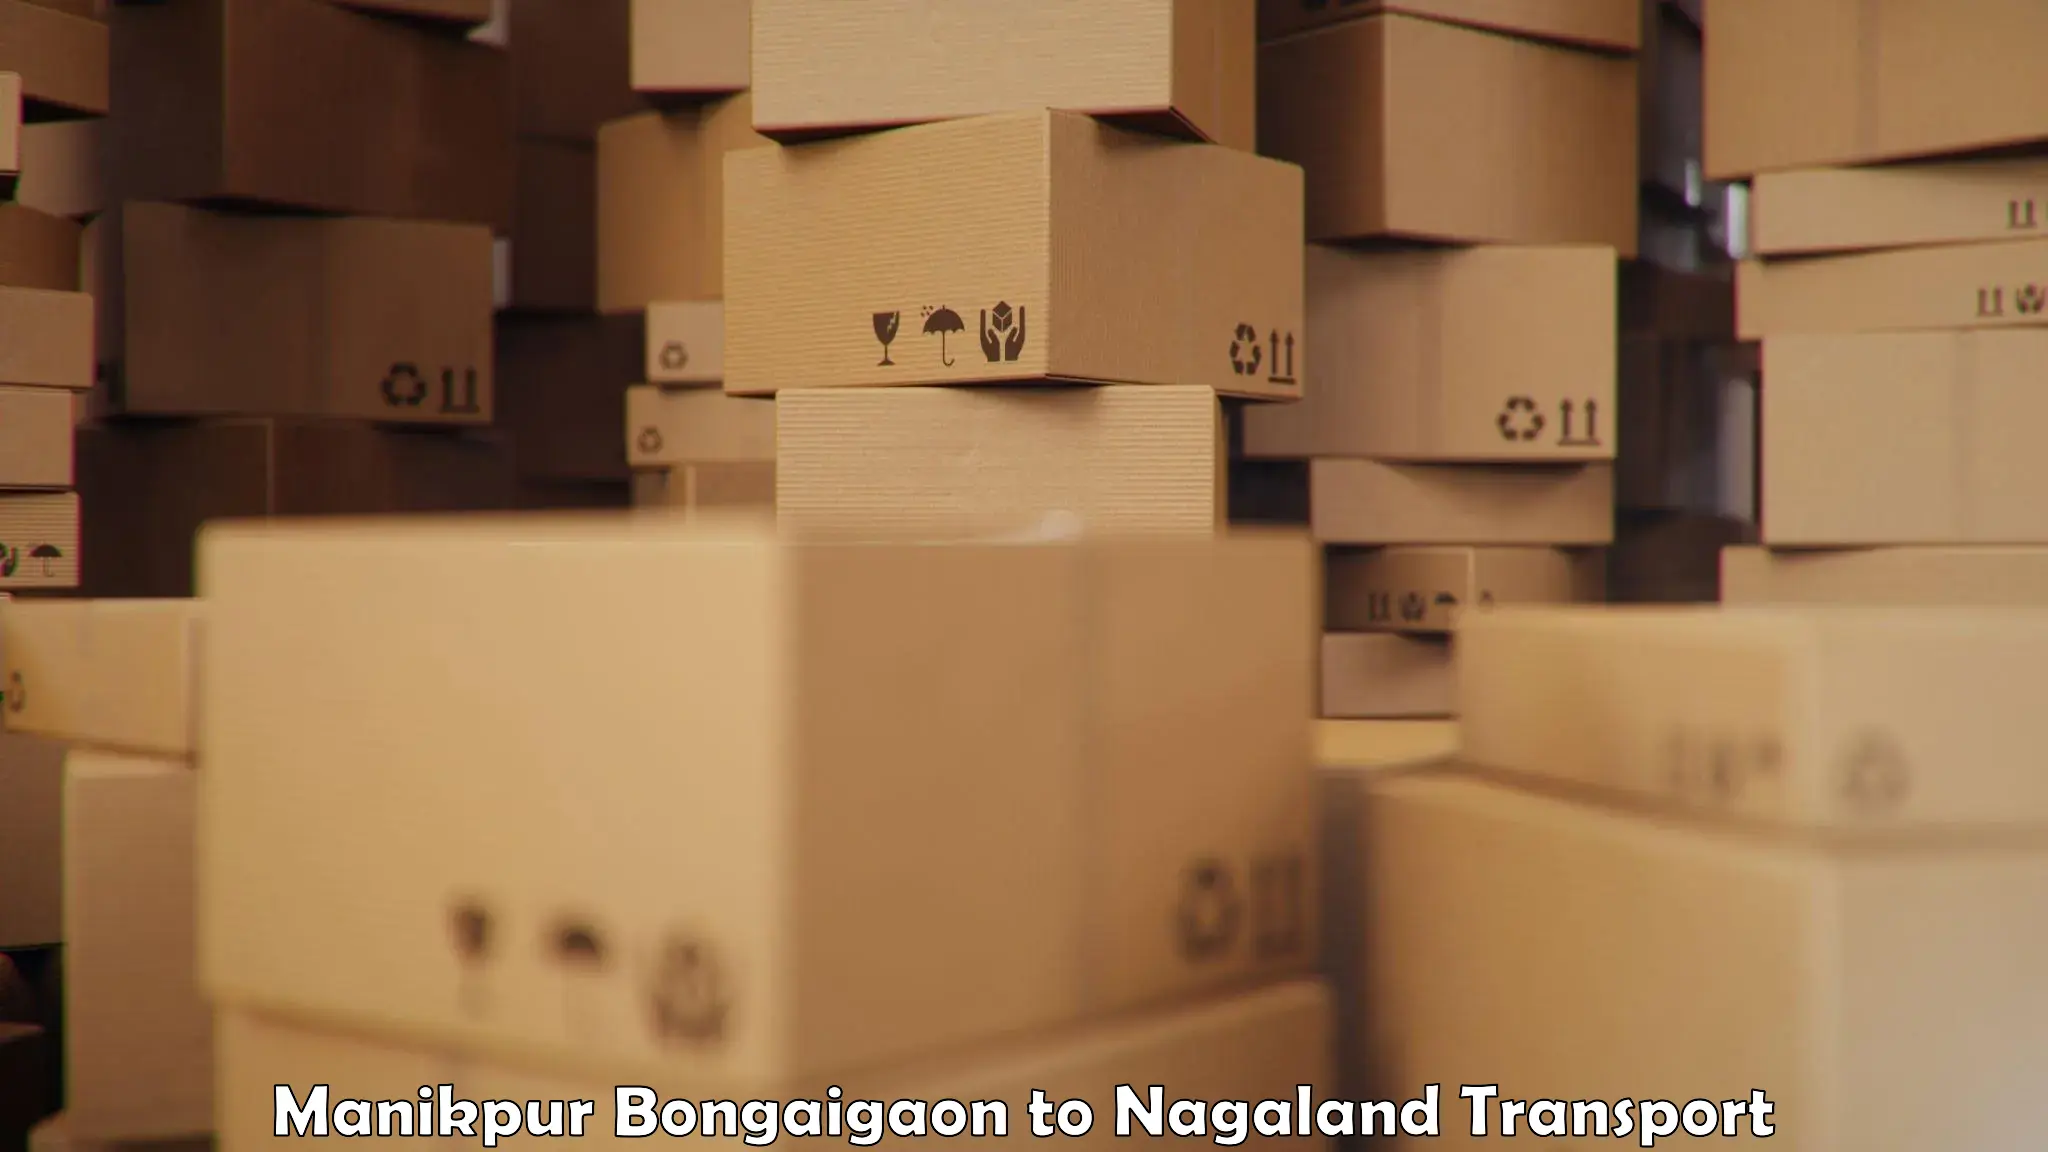 Domestic goods transportation services in Manikpur Bongaigaon to Phek